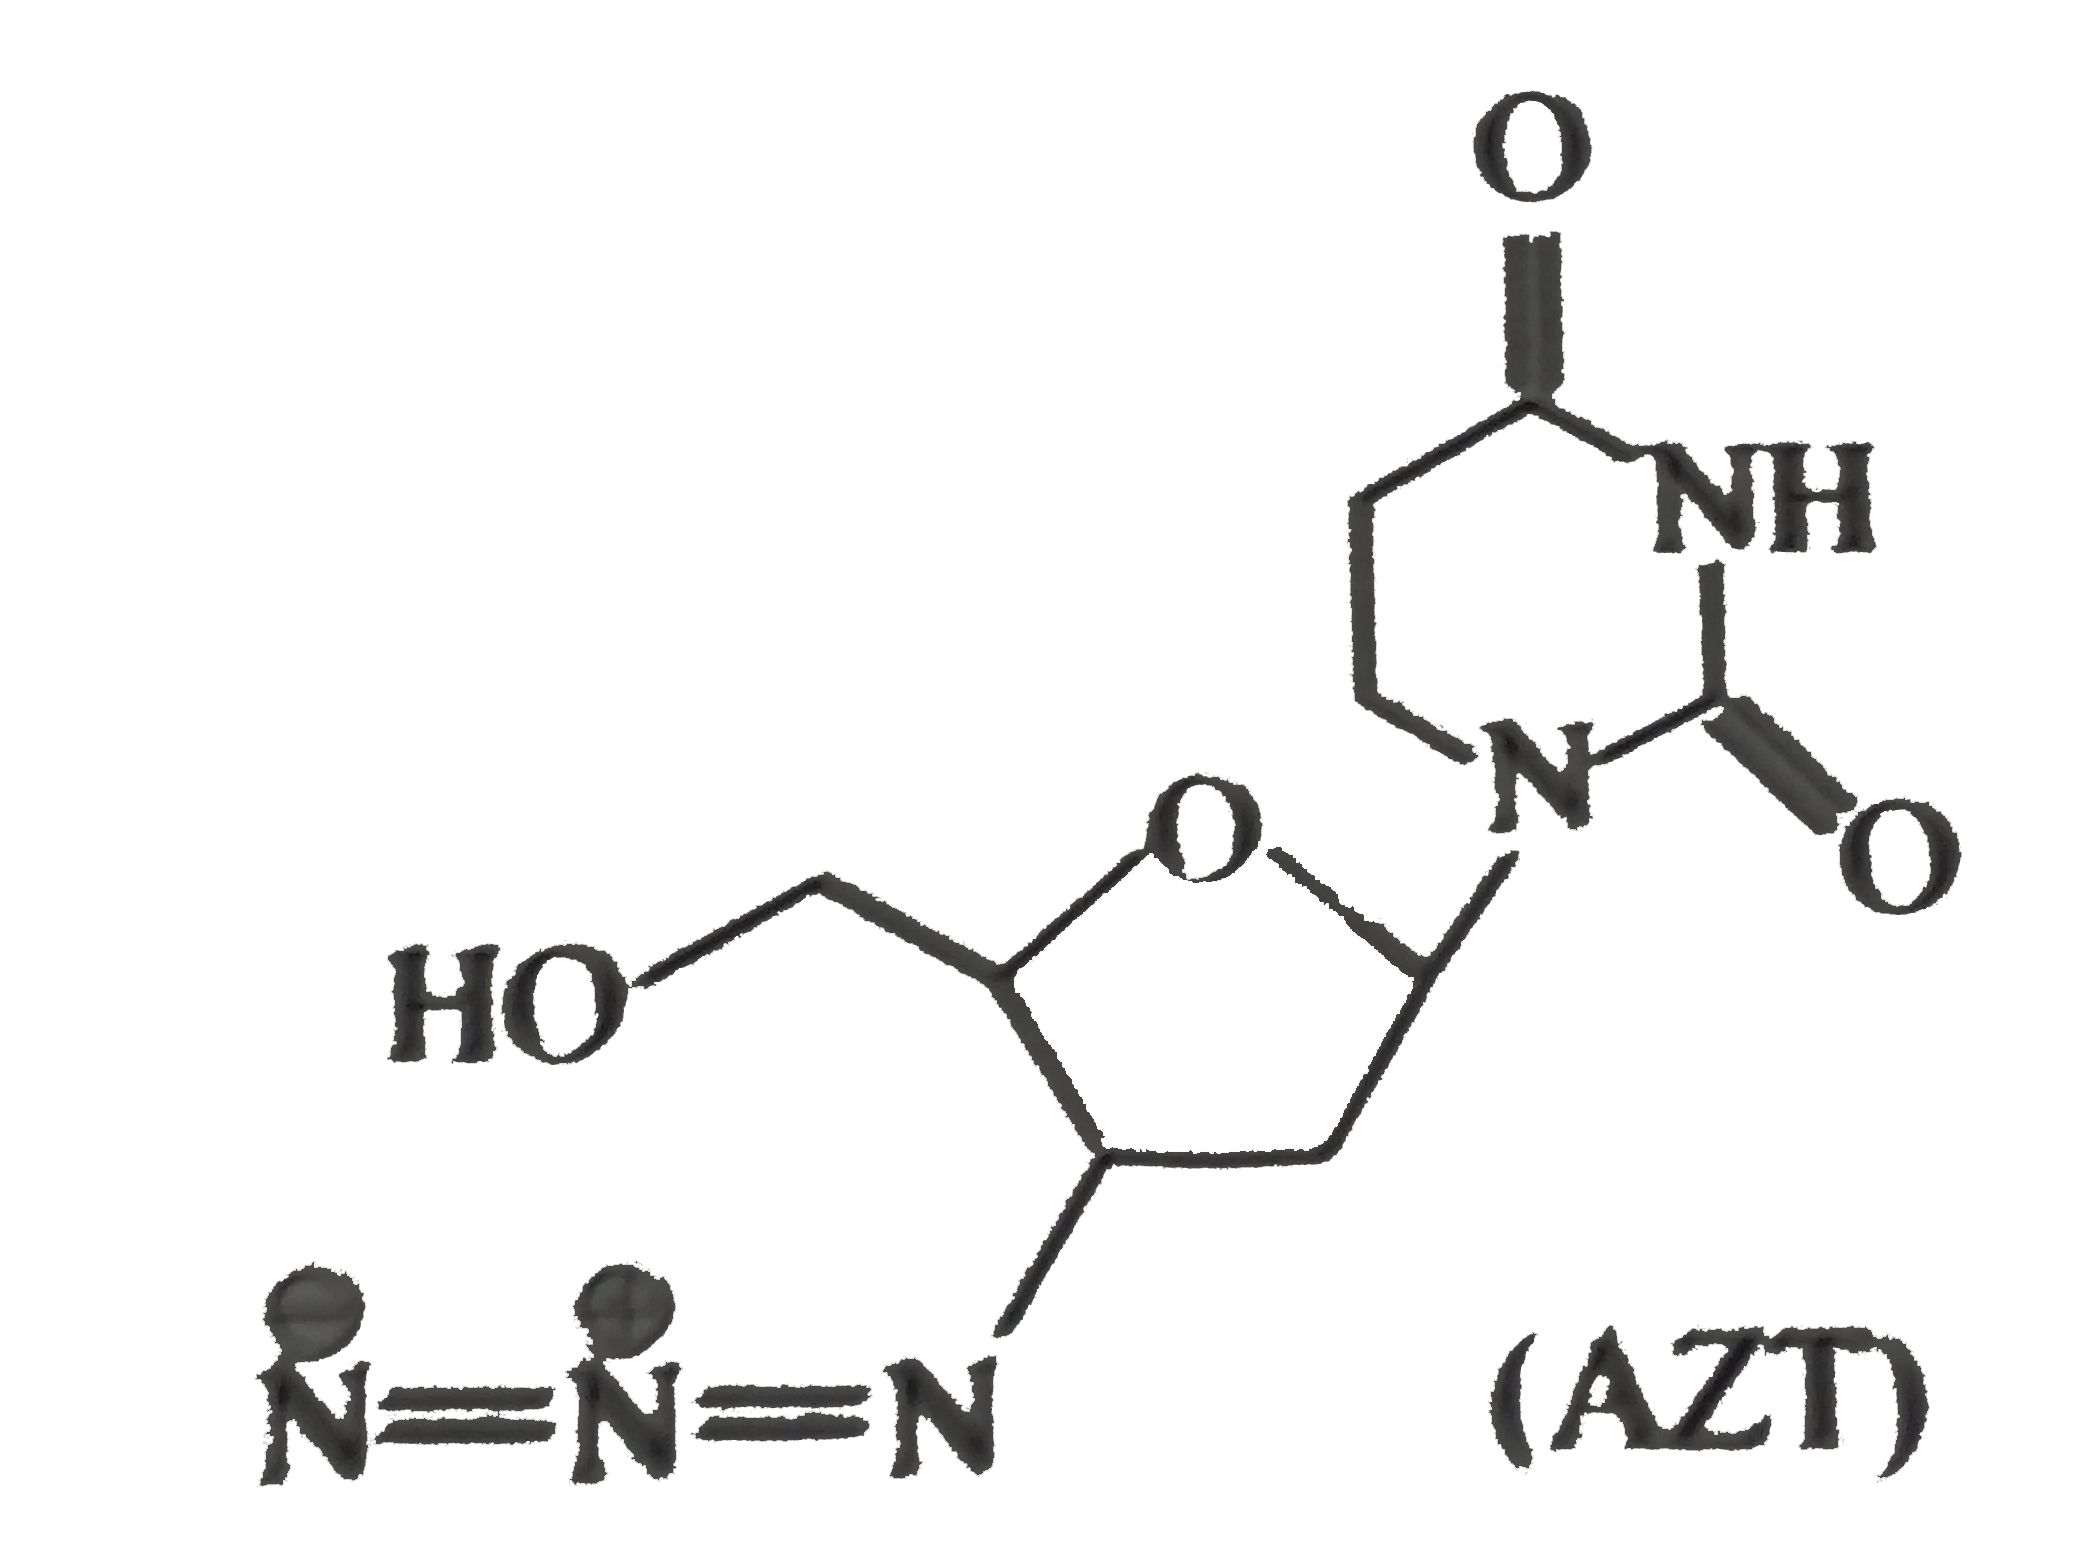 AZT structure is given above find which of the following functional groups are present in AZT.